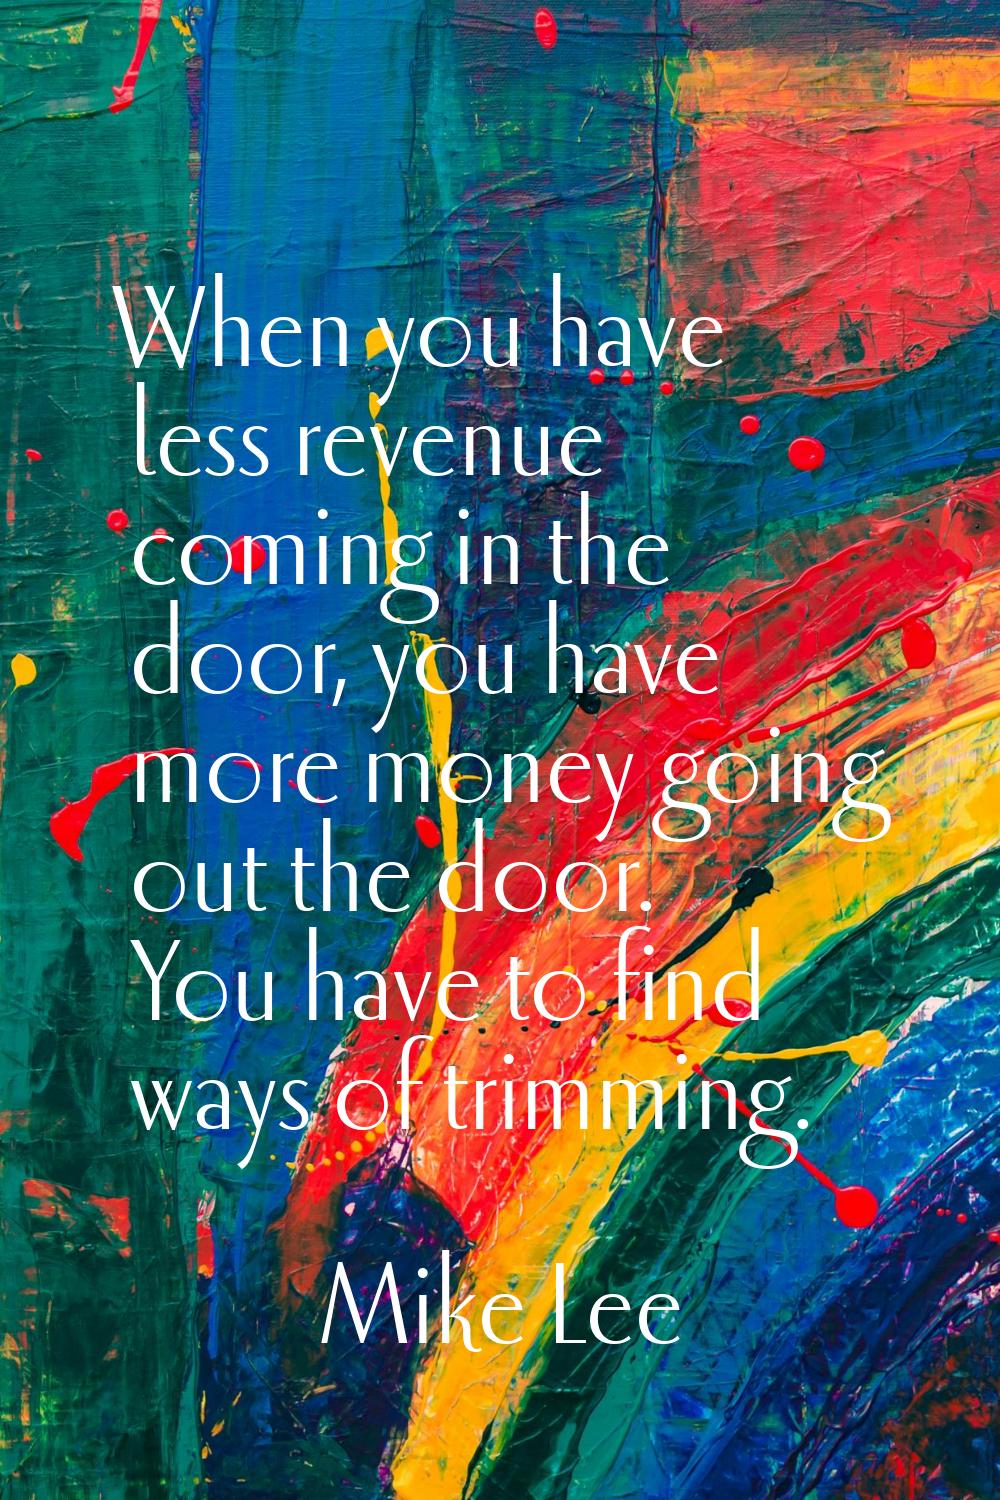 When you have less revenue coming in the door, you have more money going out the door. You have to 